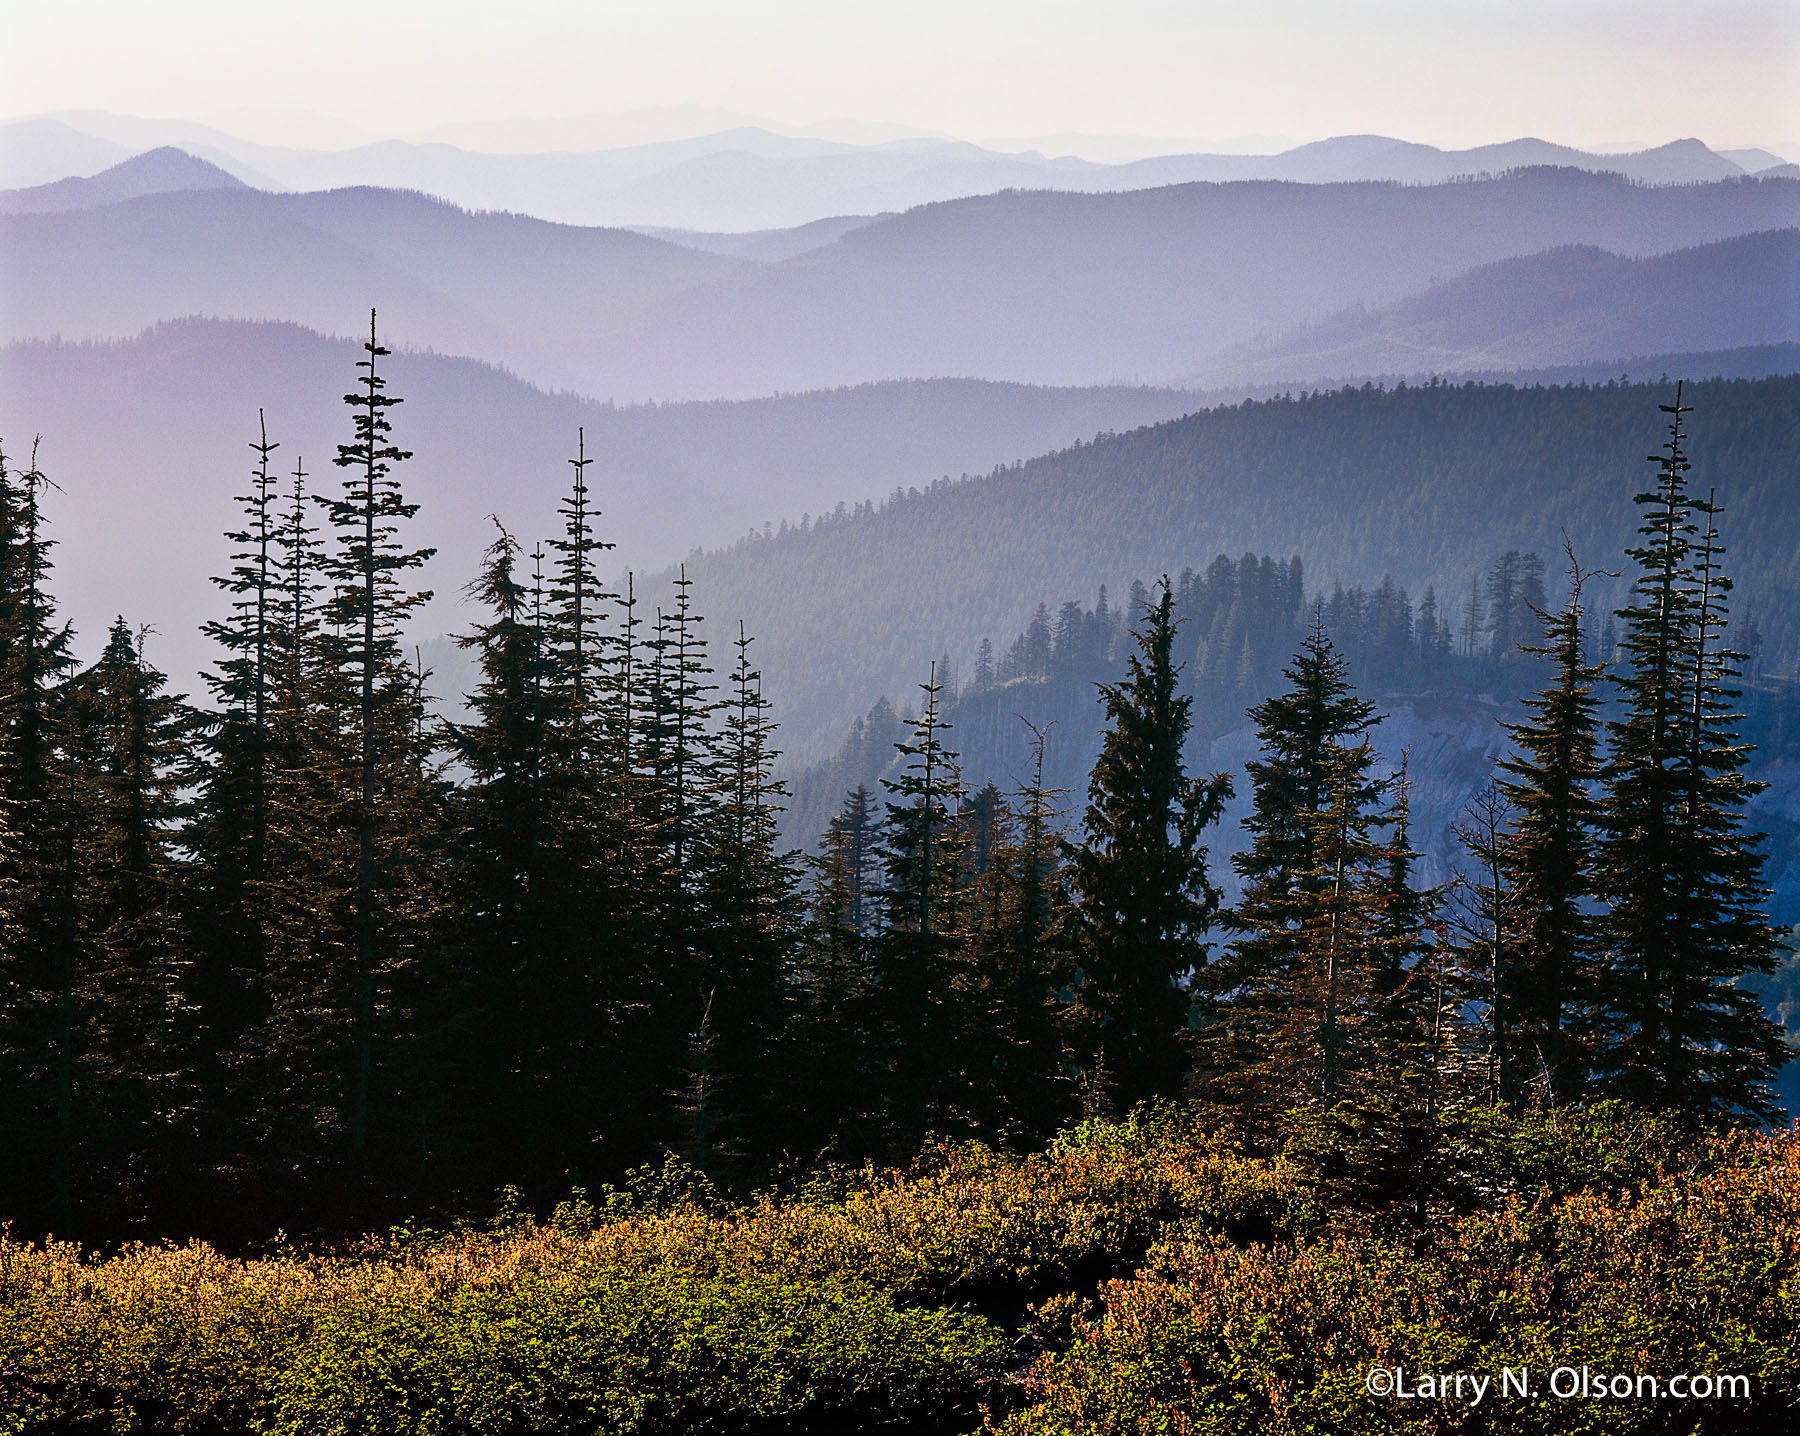 Sandy River Watershed and Cascades, OR | The evening light silhouettes the myriad ridgelines and forest.